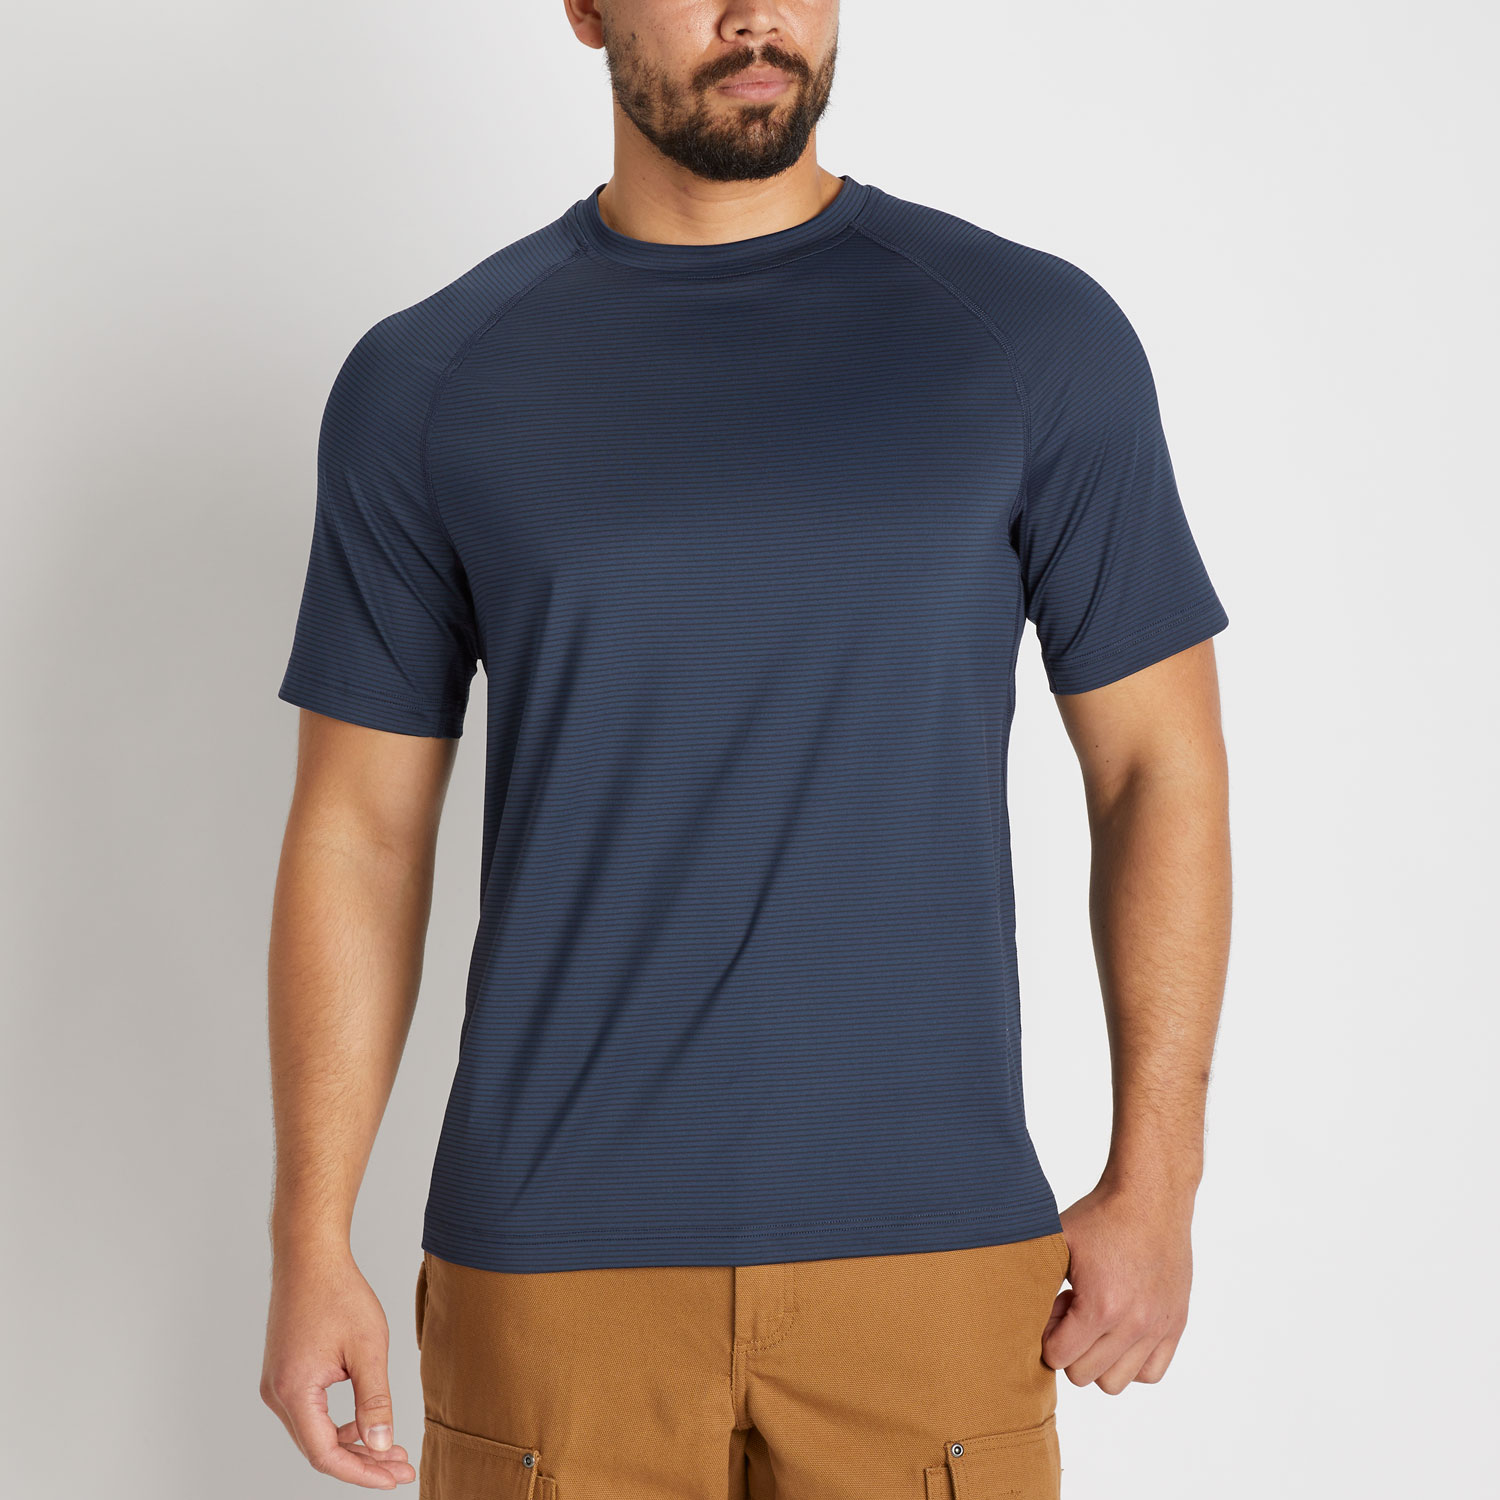 Keep the Funk off Your Junk with Duluth Trading Company's Men's